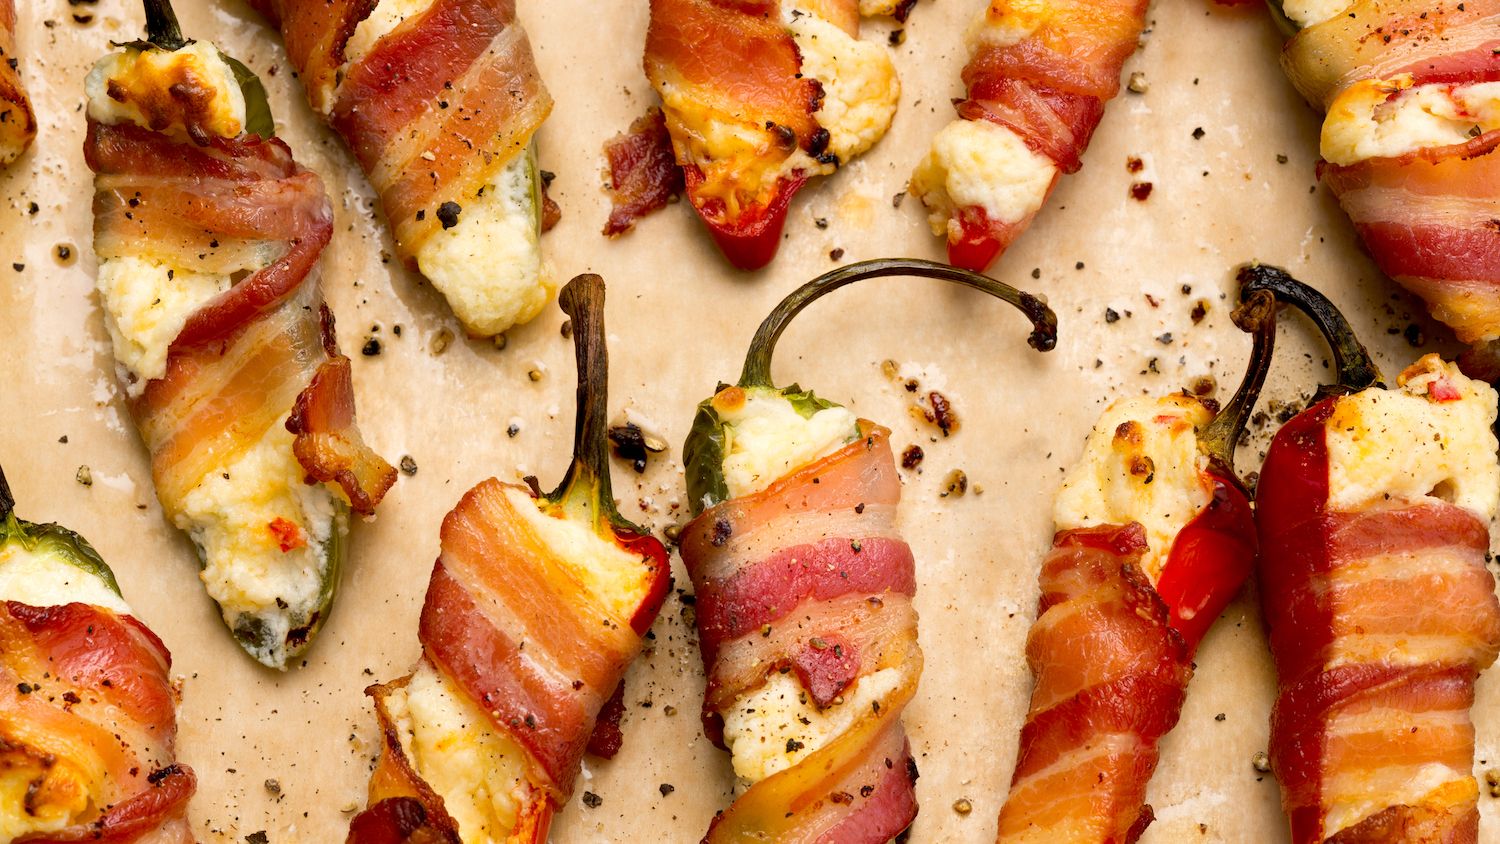 10to12 Xxx Video - JalapeÃ±o Poppers Recipe - How to Make JalapeÃ±o Poppers With Bacon